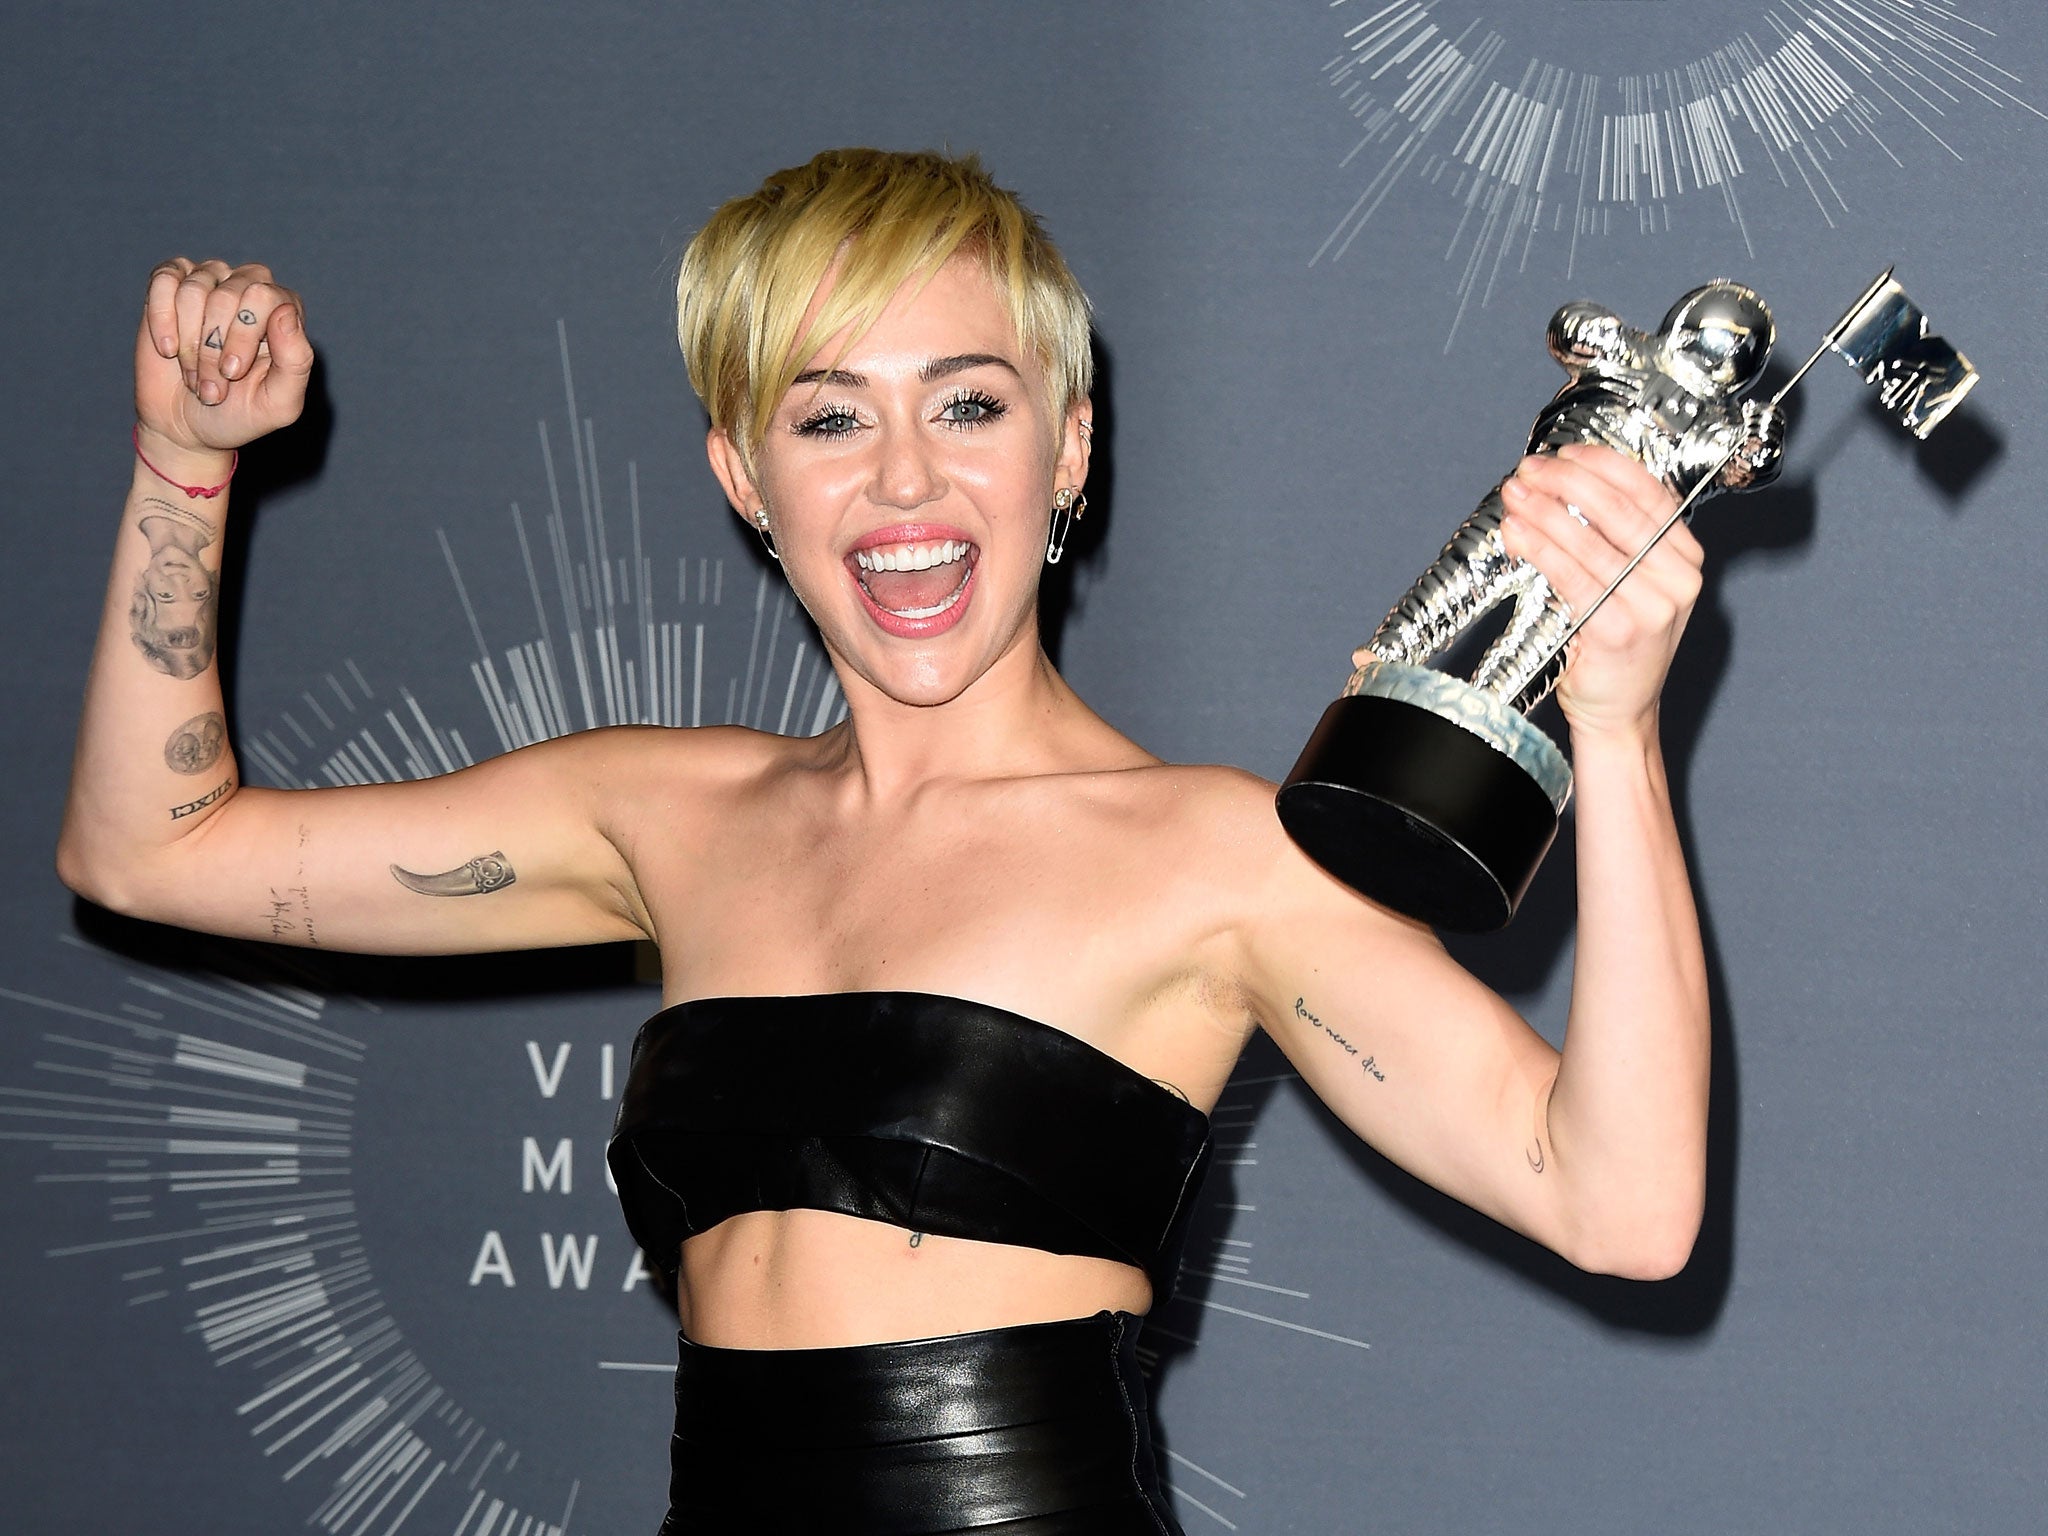 Miley Cyrus has taken home the prize for Video of the Year at the MTV Video Music Awards 2014